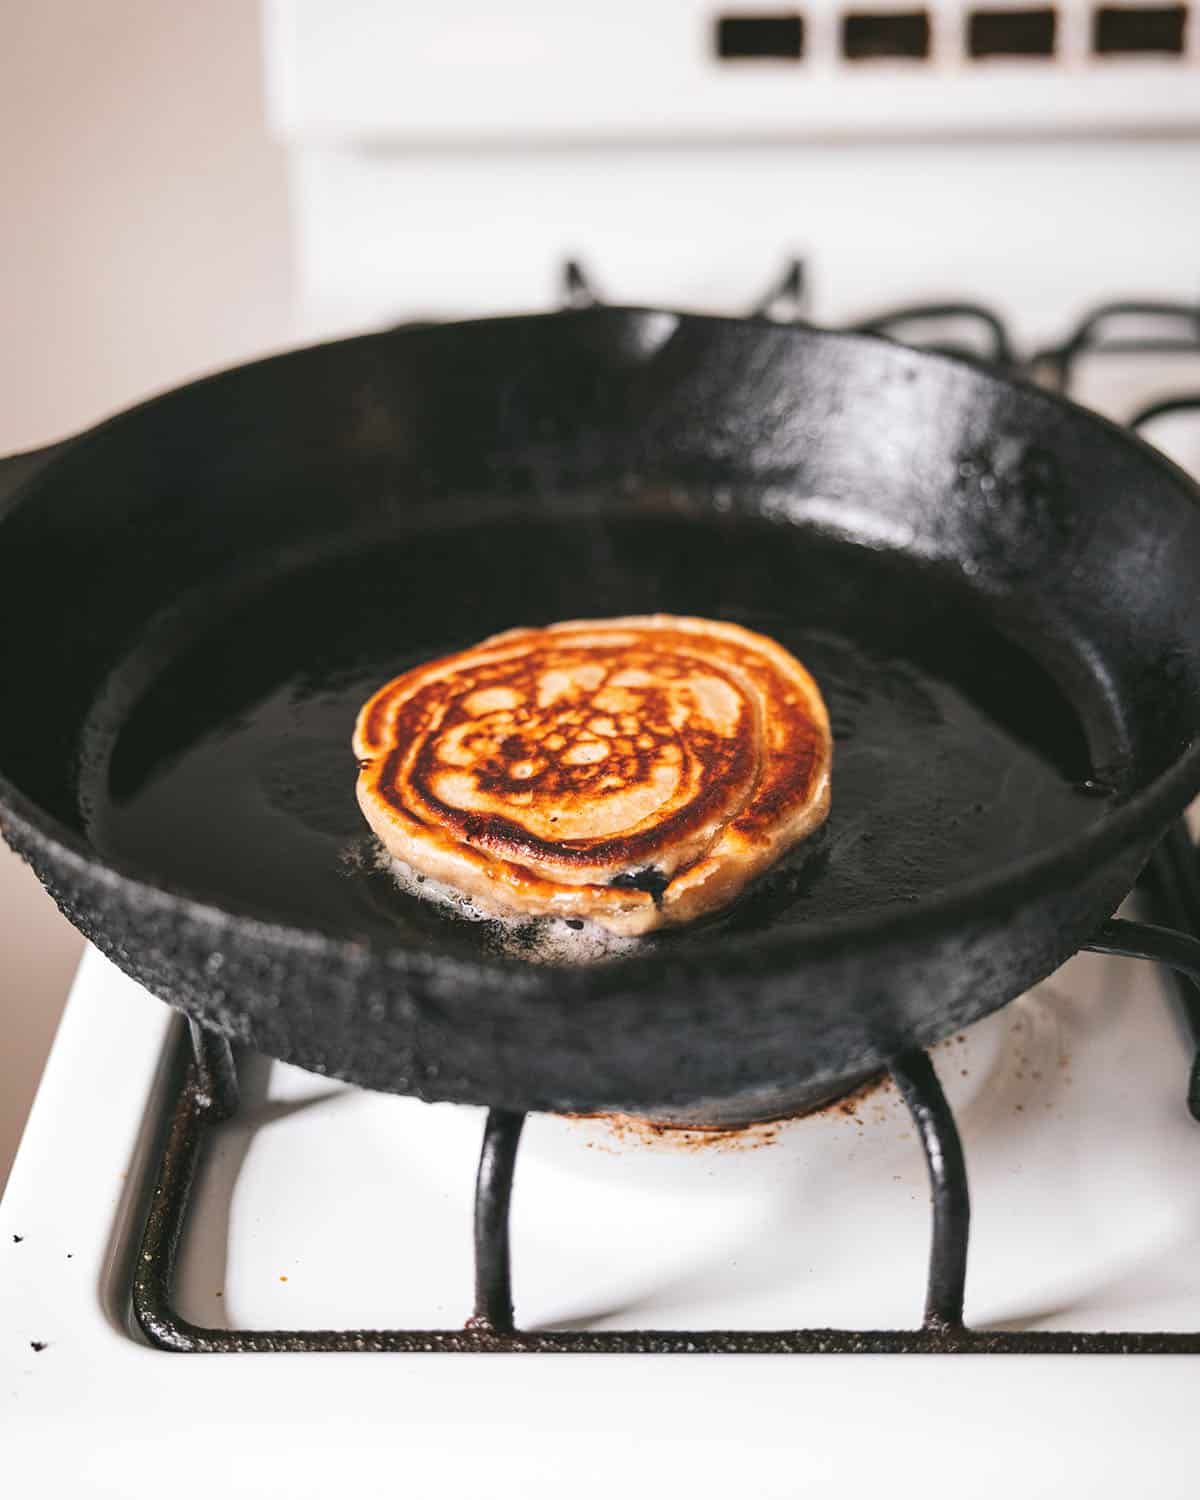 A flipped pancake cooking on the second side in a cast iron skillet.